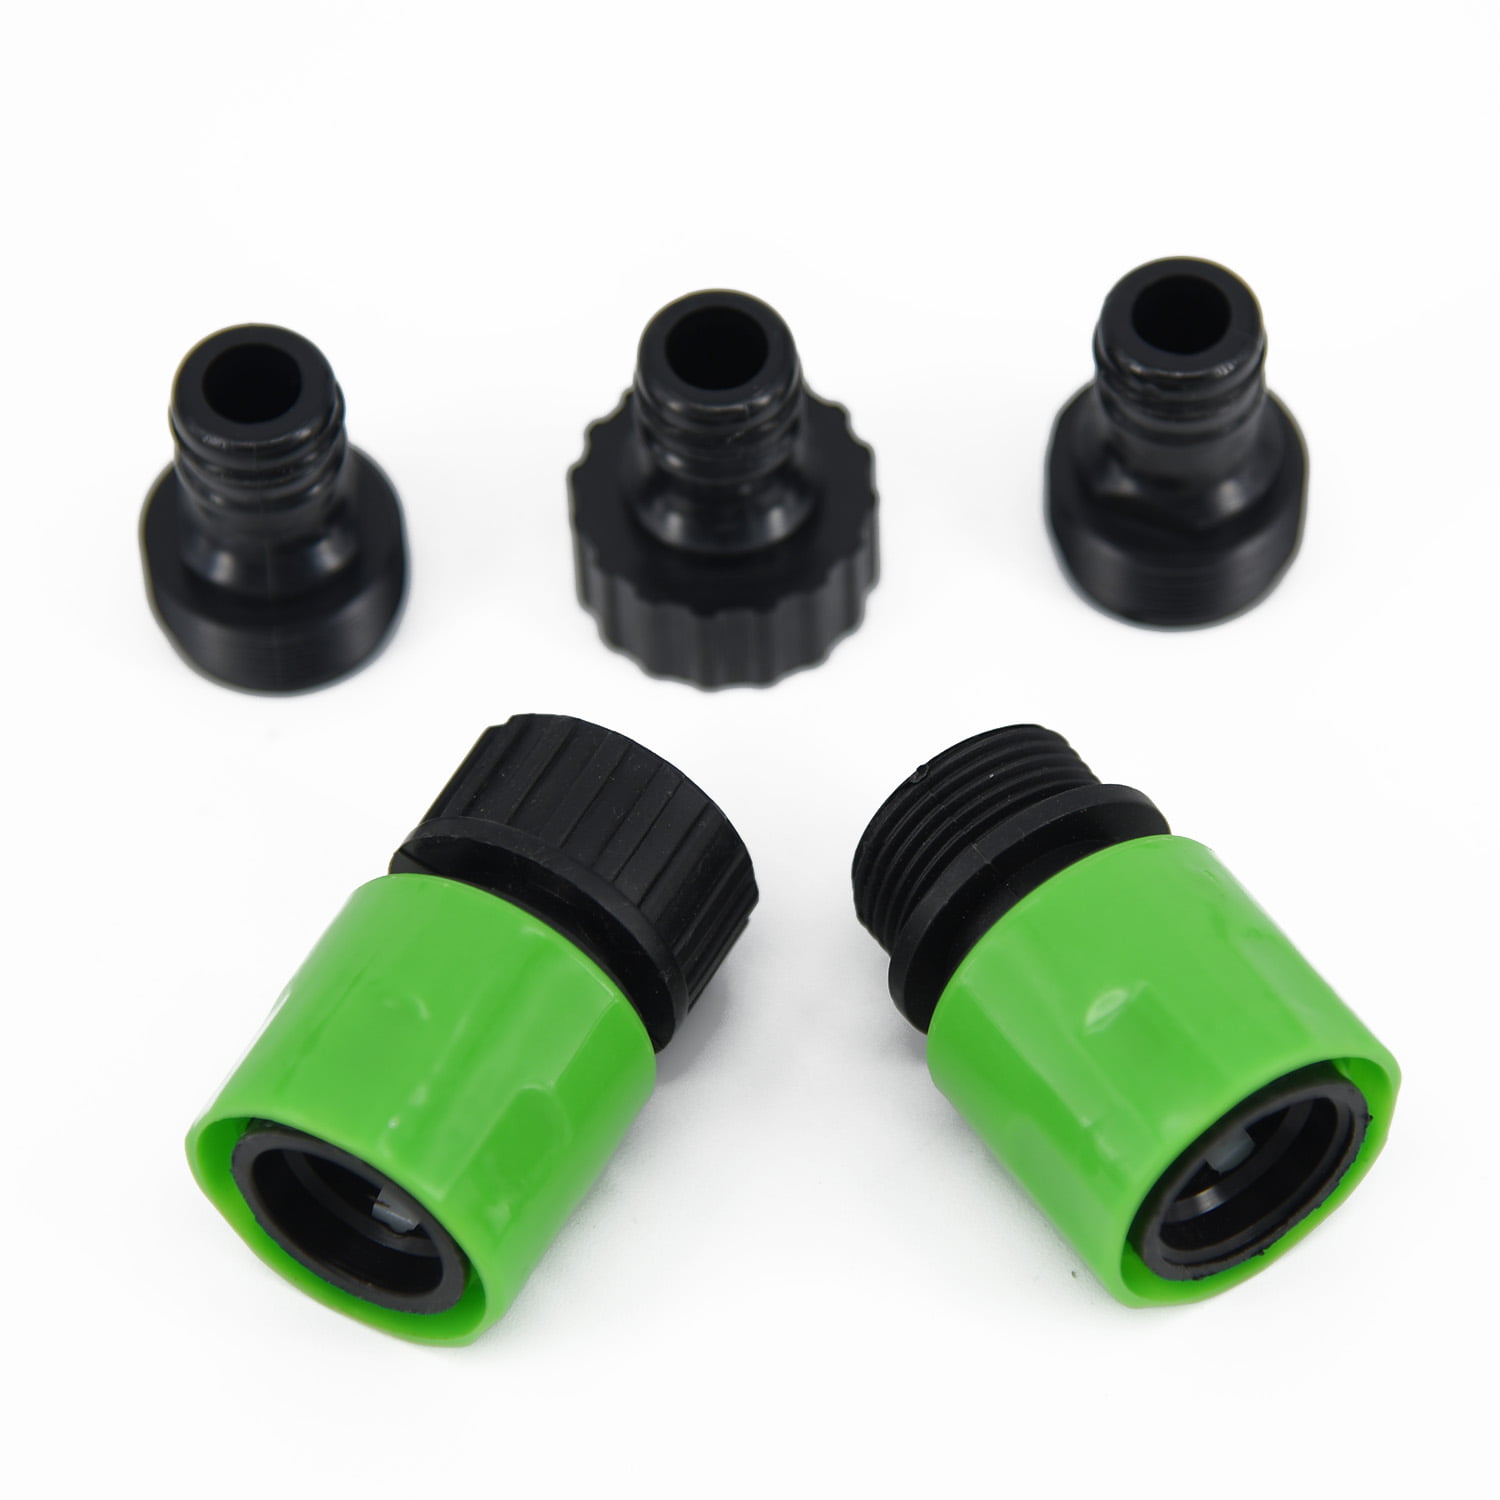 Threaded Tap Connector 5pcs Hose Quick Connect USA Style Watering Accessories